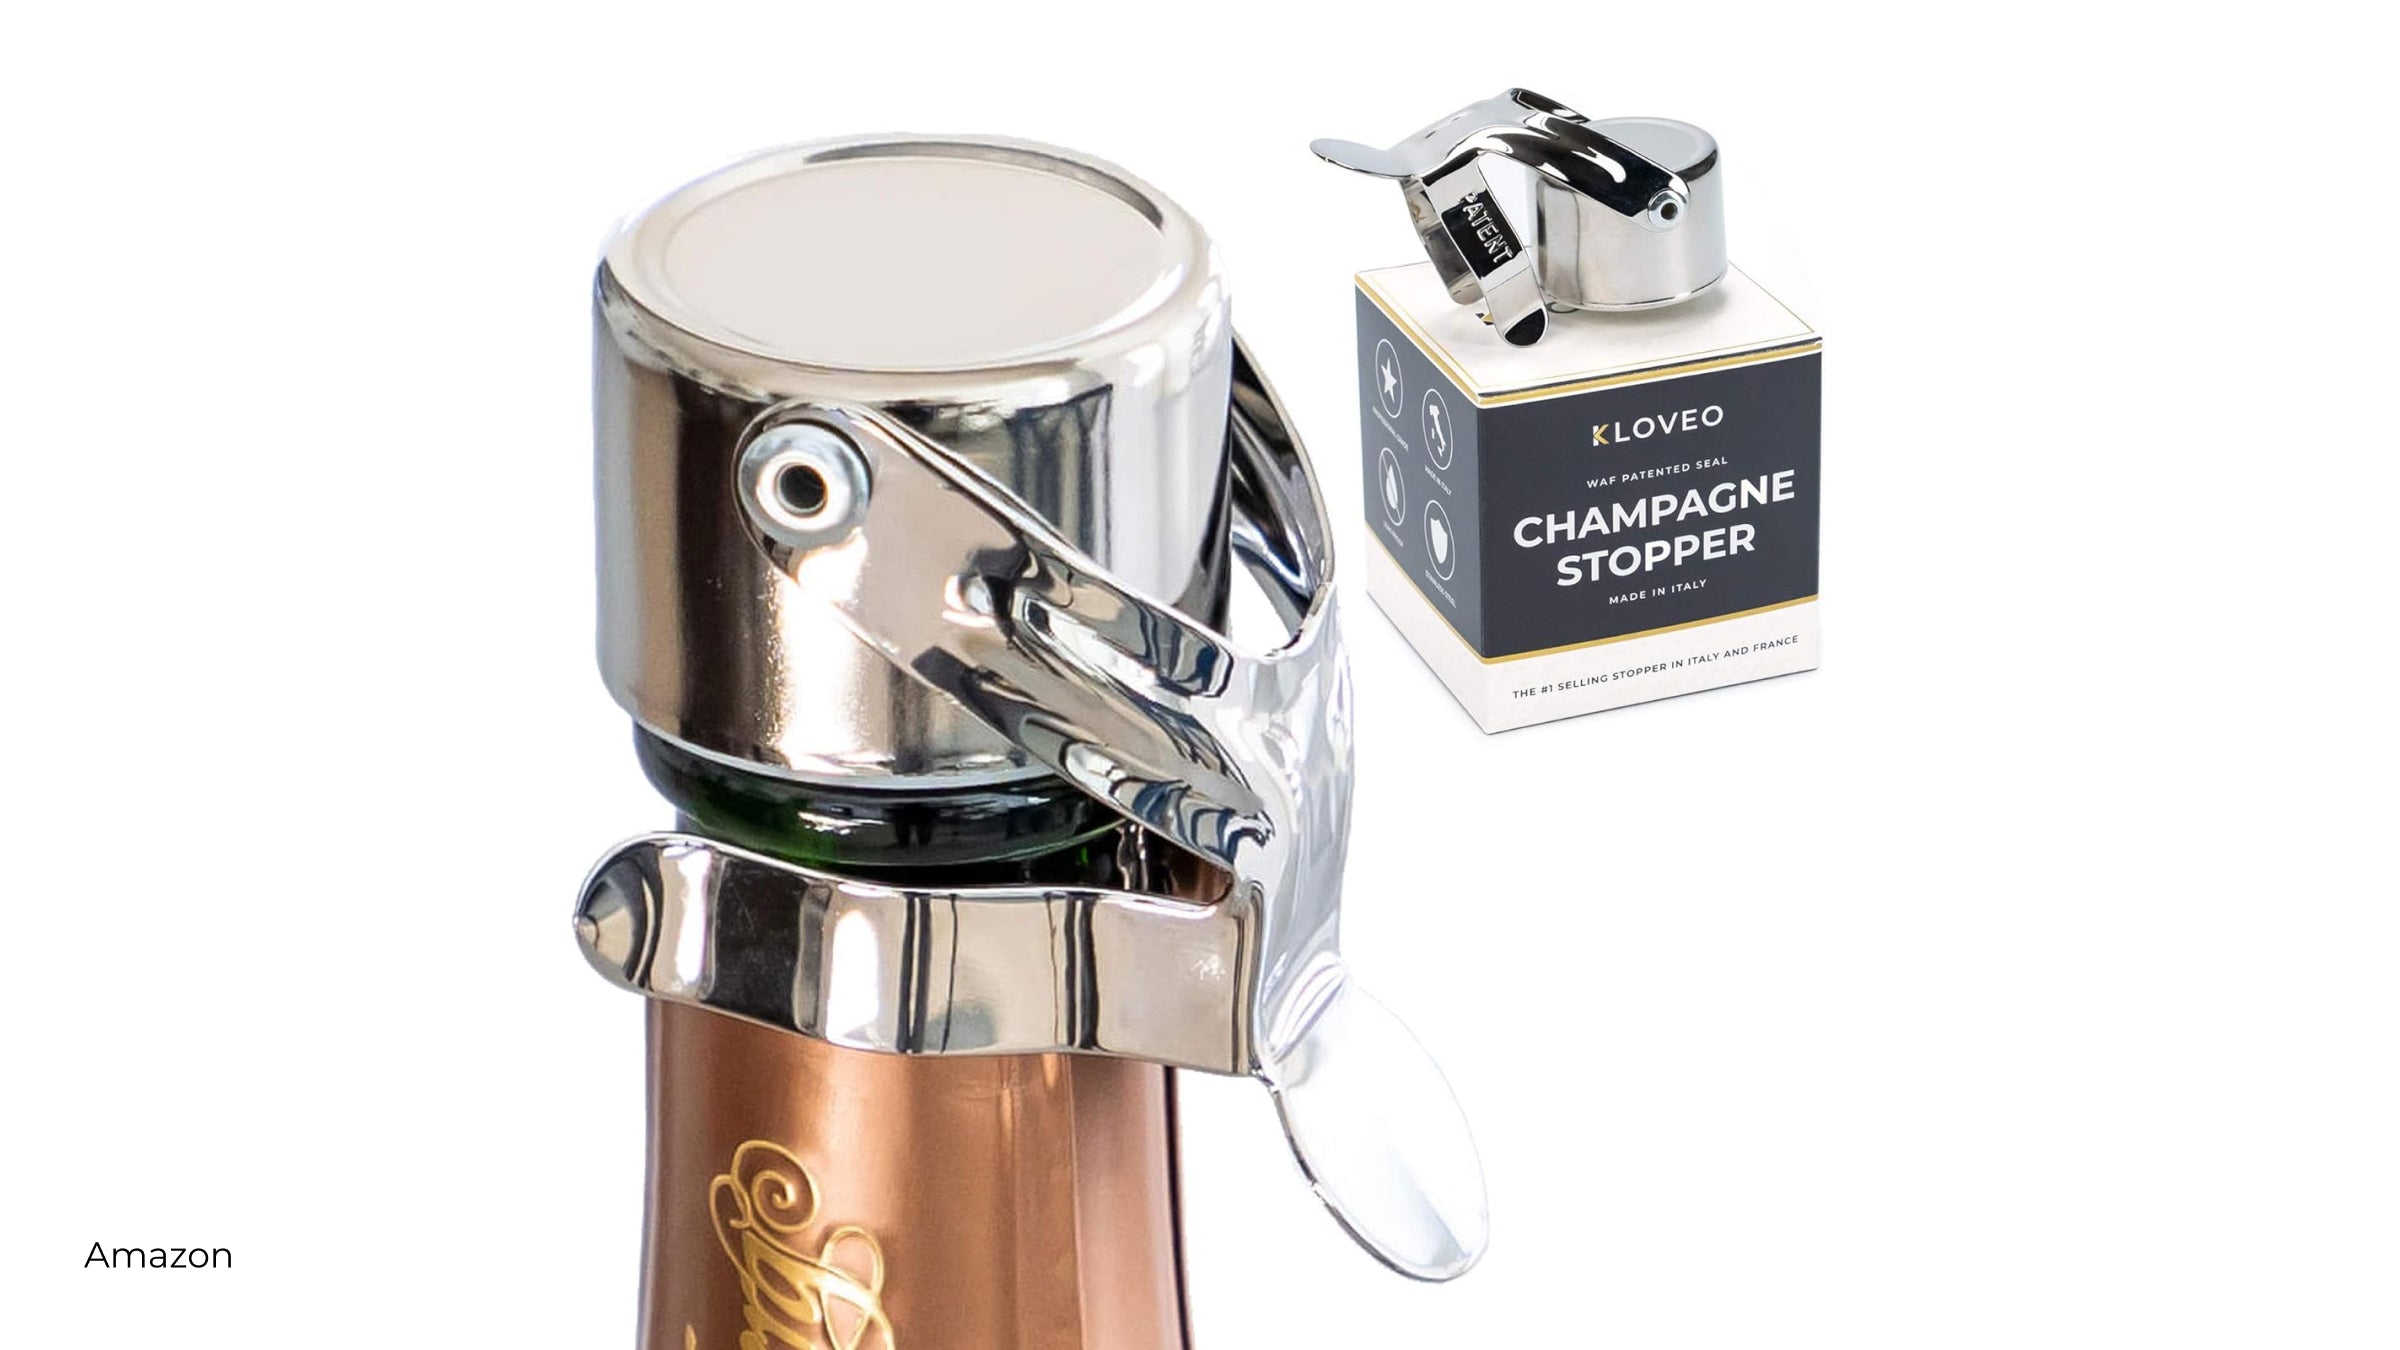 Chrome champagne and sparkling wine stopper from Amazon